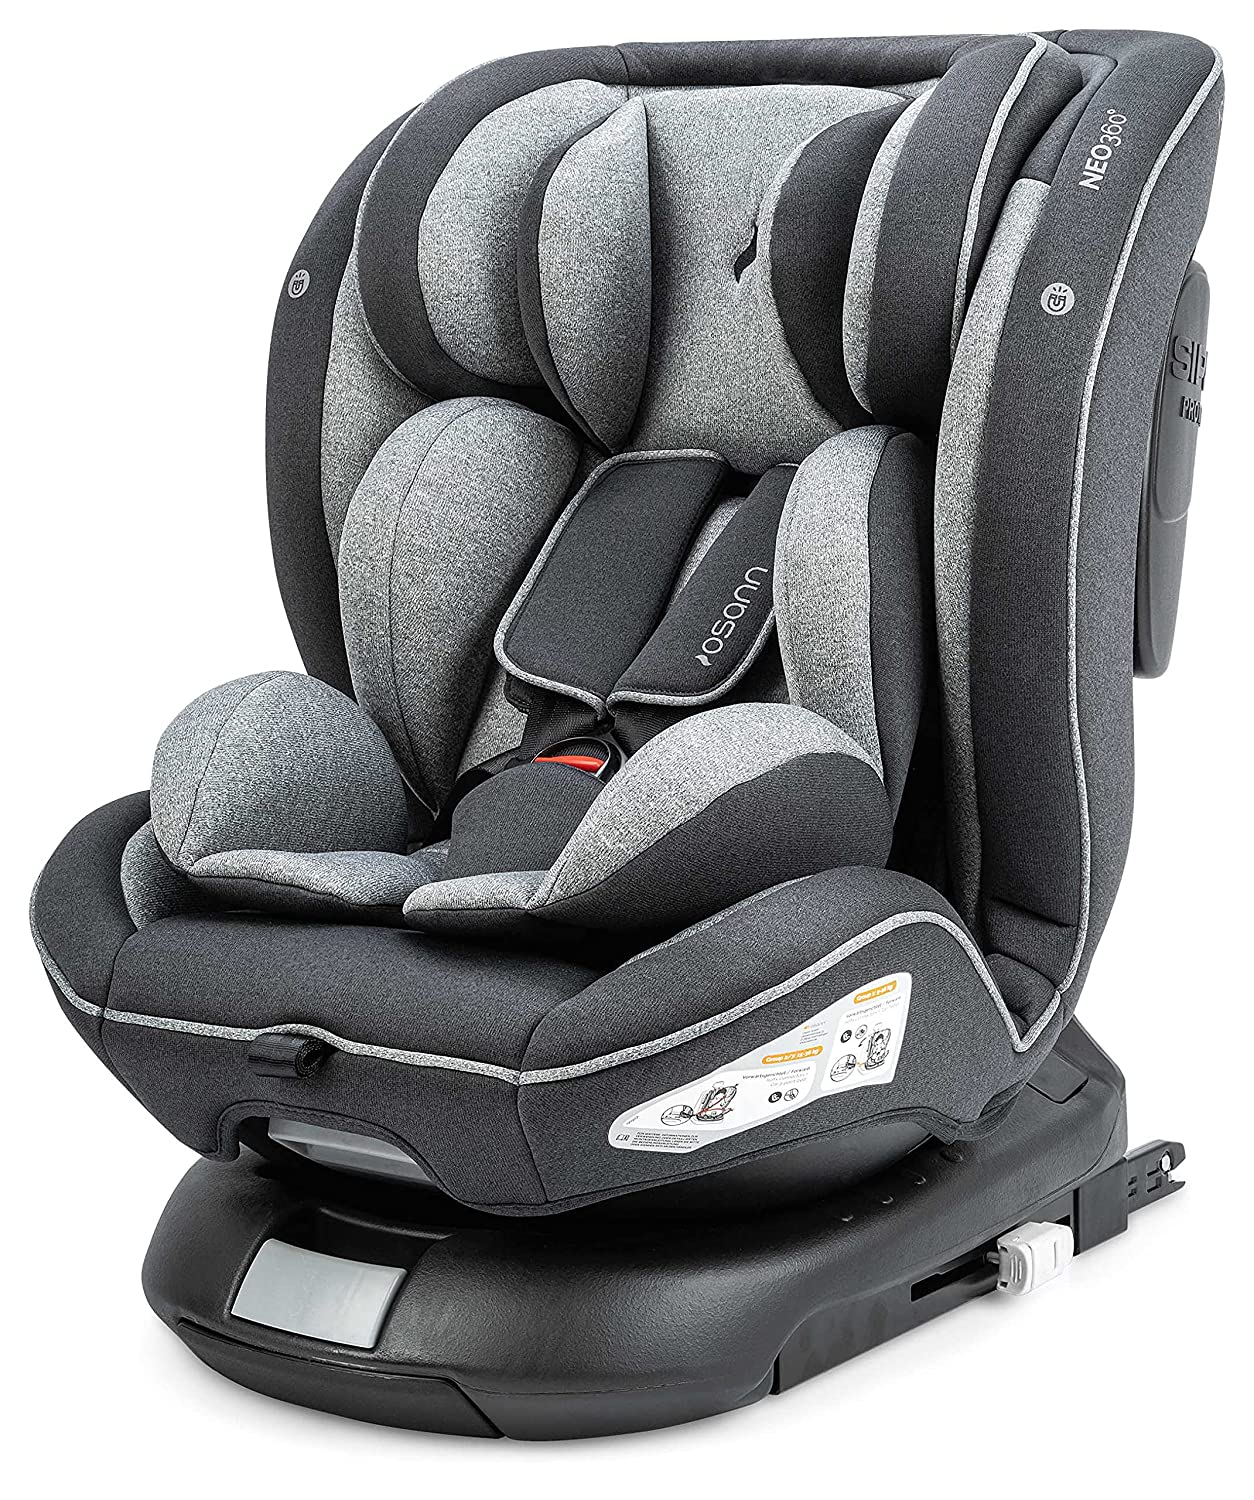 Osann Neo360 Child Seat Group 0+/1/2/3 (0-36 kg), Reboarder Child Seat with Isofix